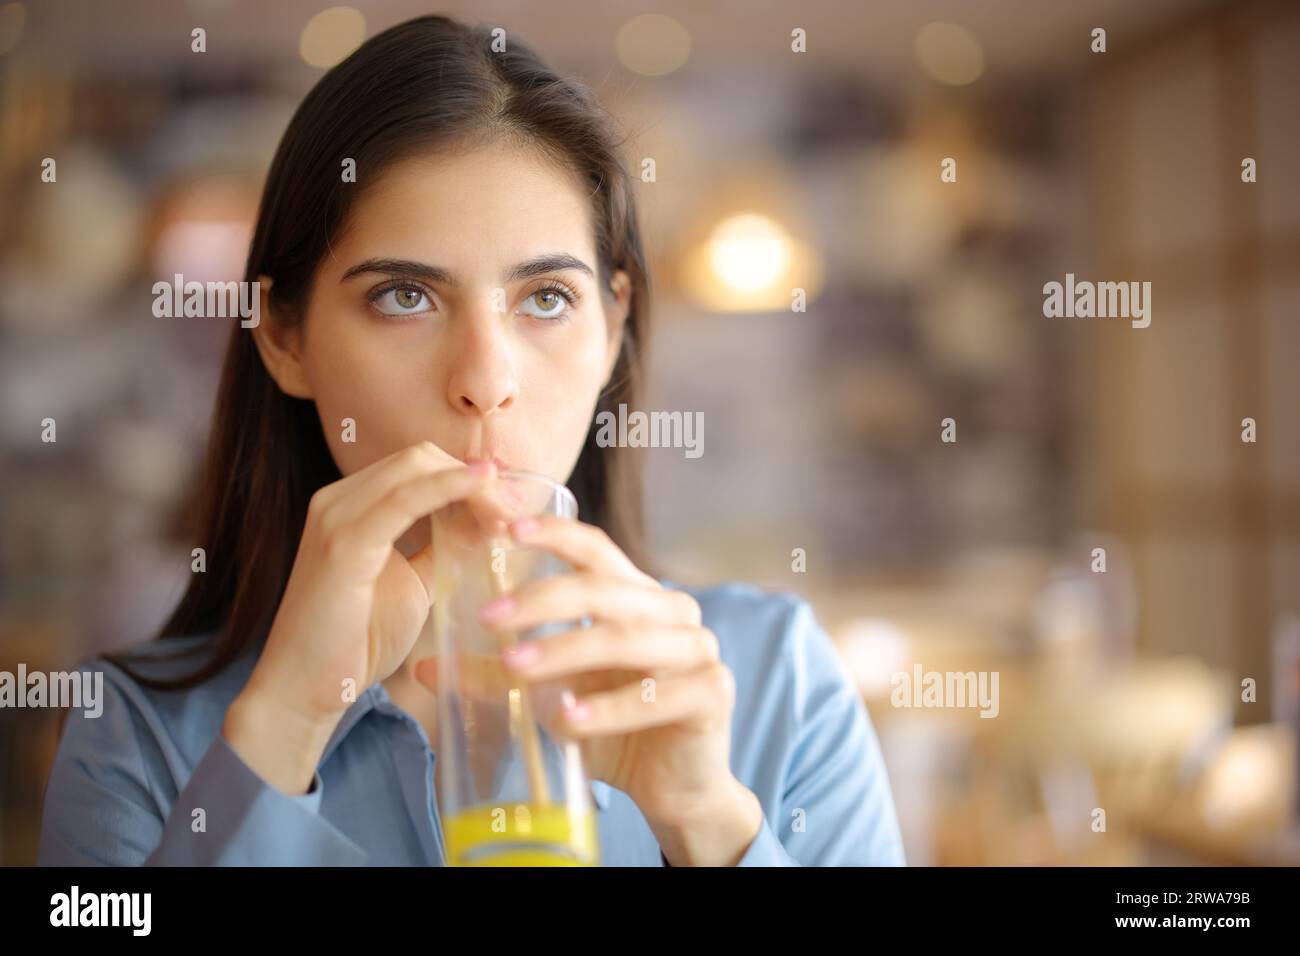 Front view of a distracted woman sipping orange juice with straw in a restaurant Stock Photo